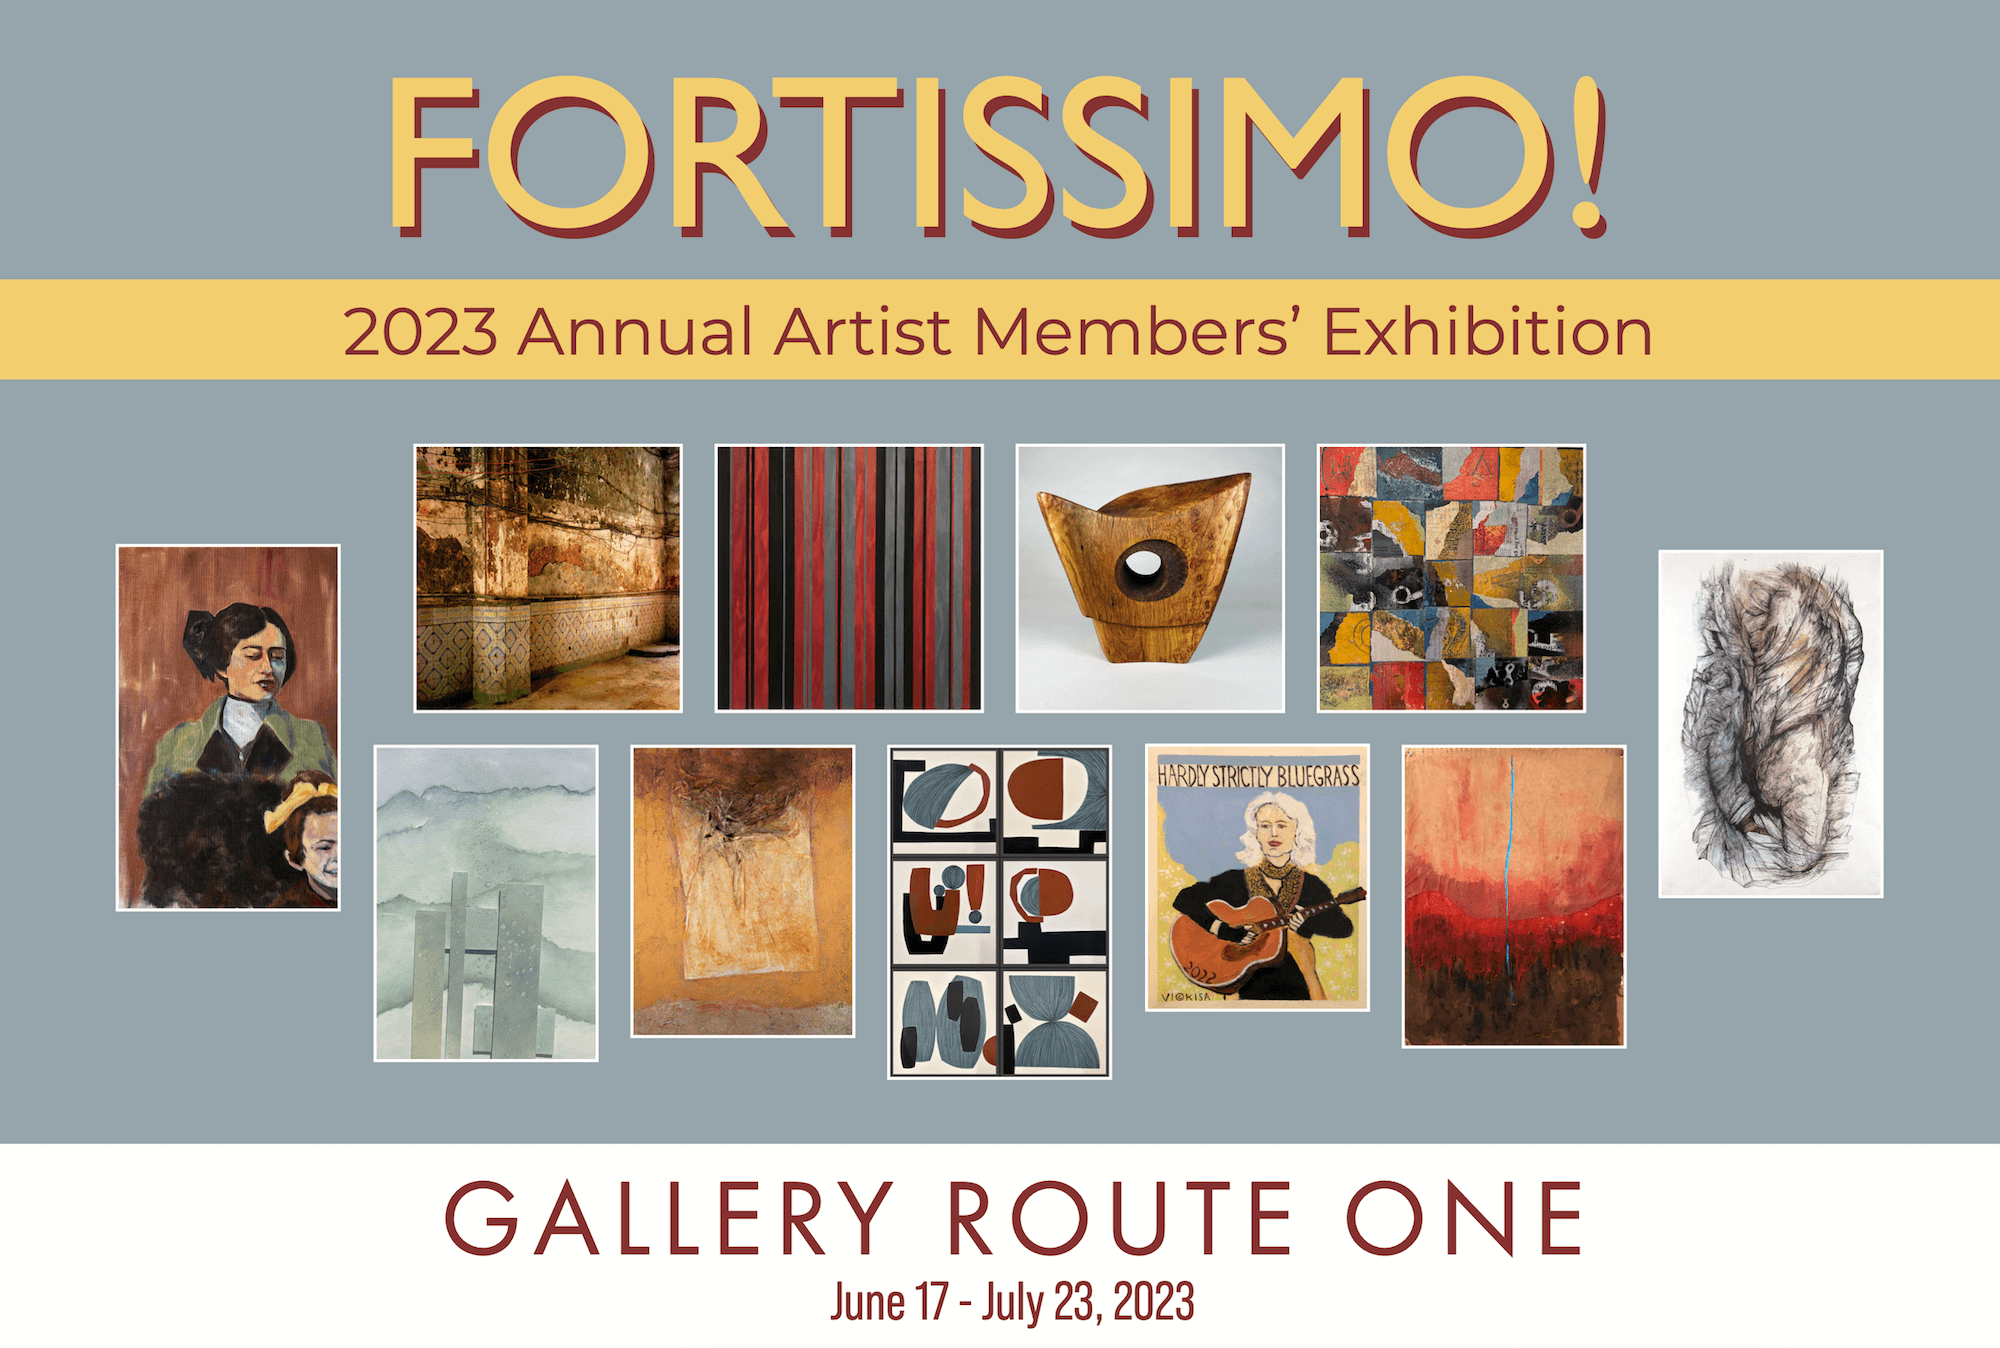 GRO - Fortissimo Exhibition - June-July 2023